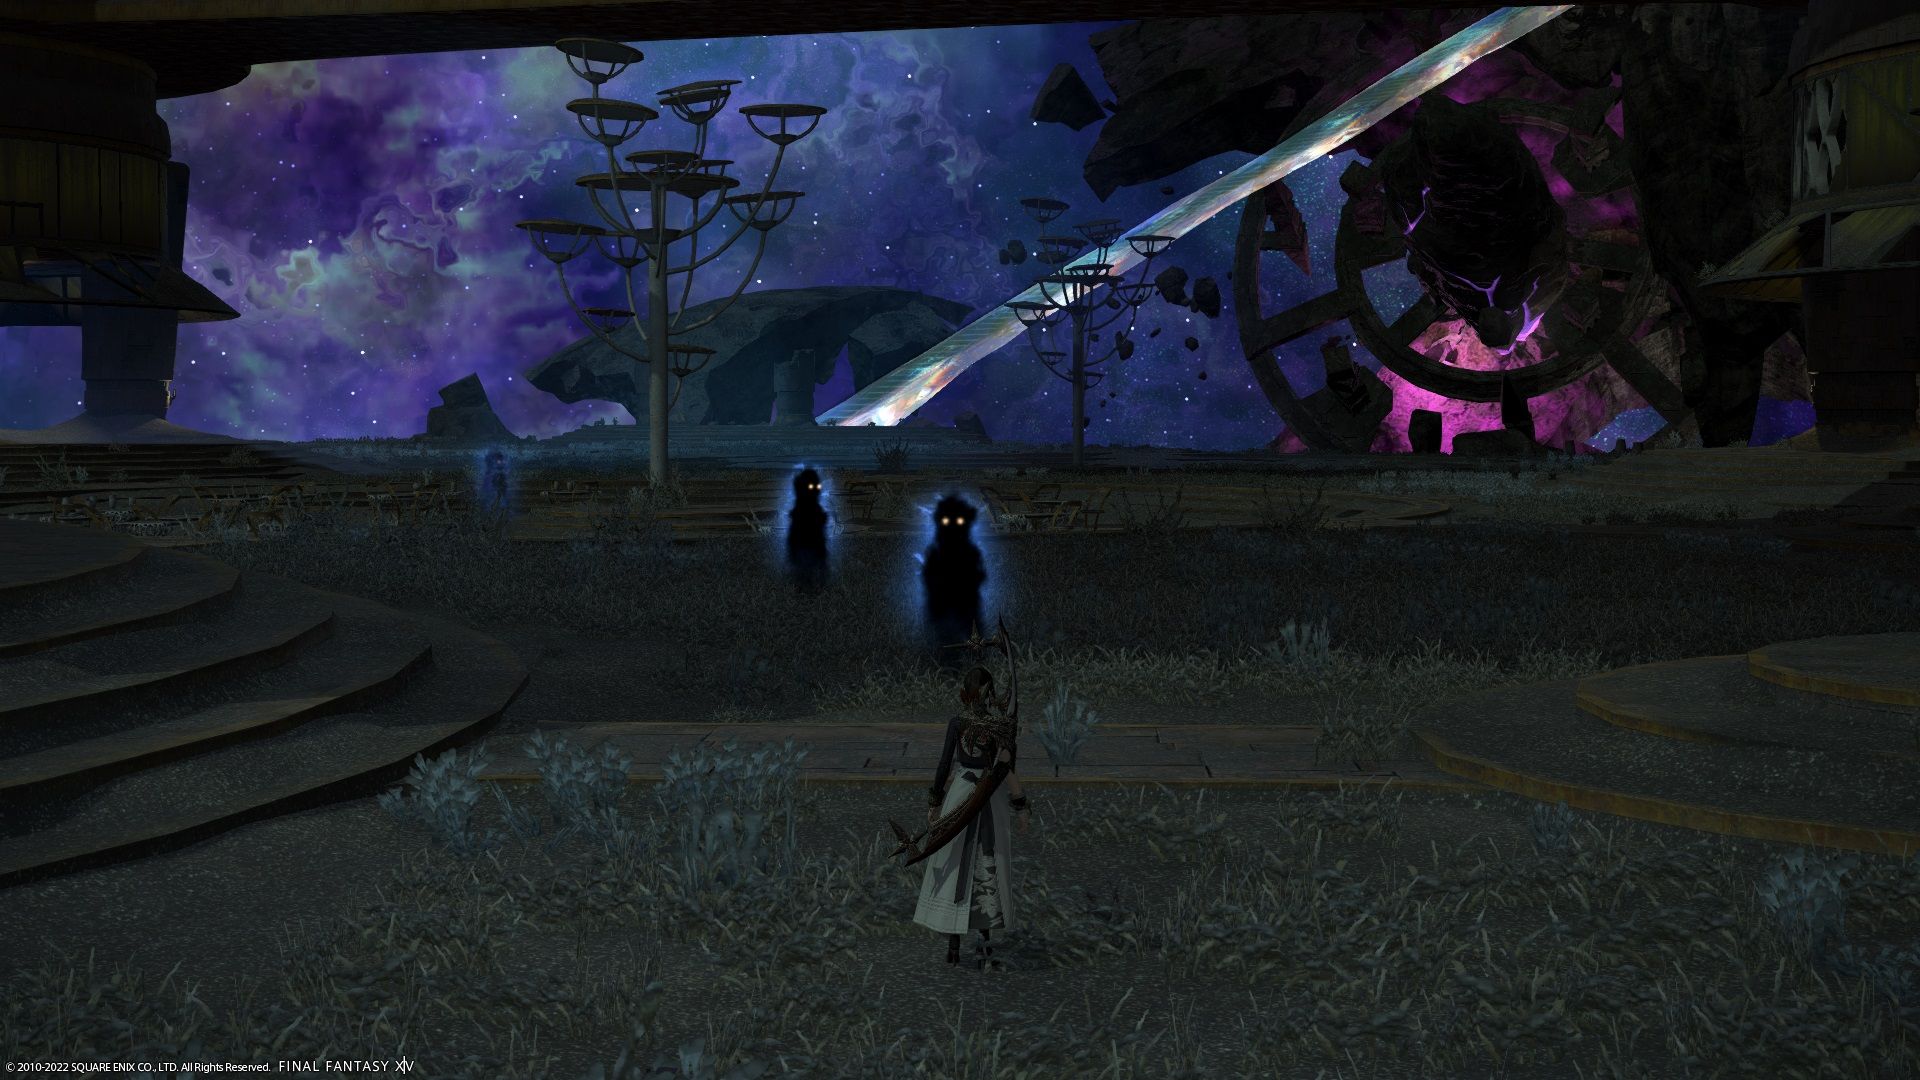 FF14 Warrior of light walking past shades in Ultima Thule